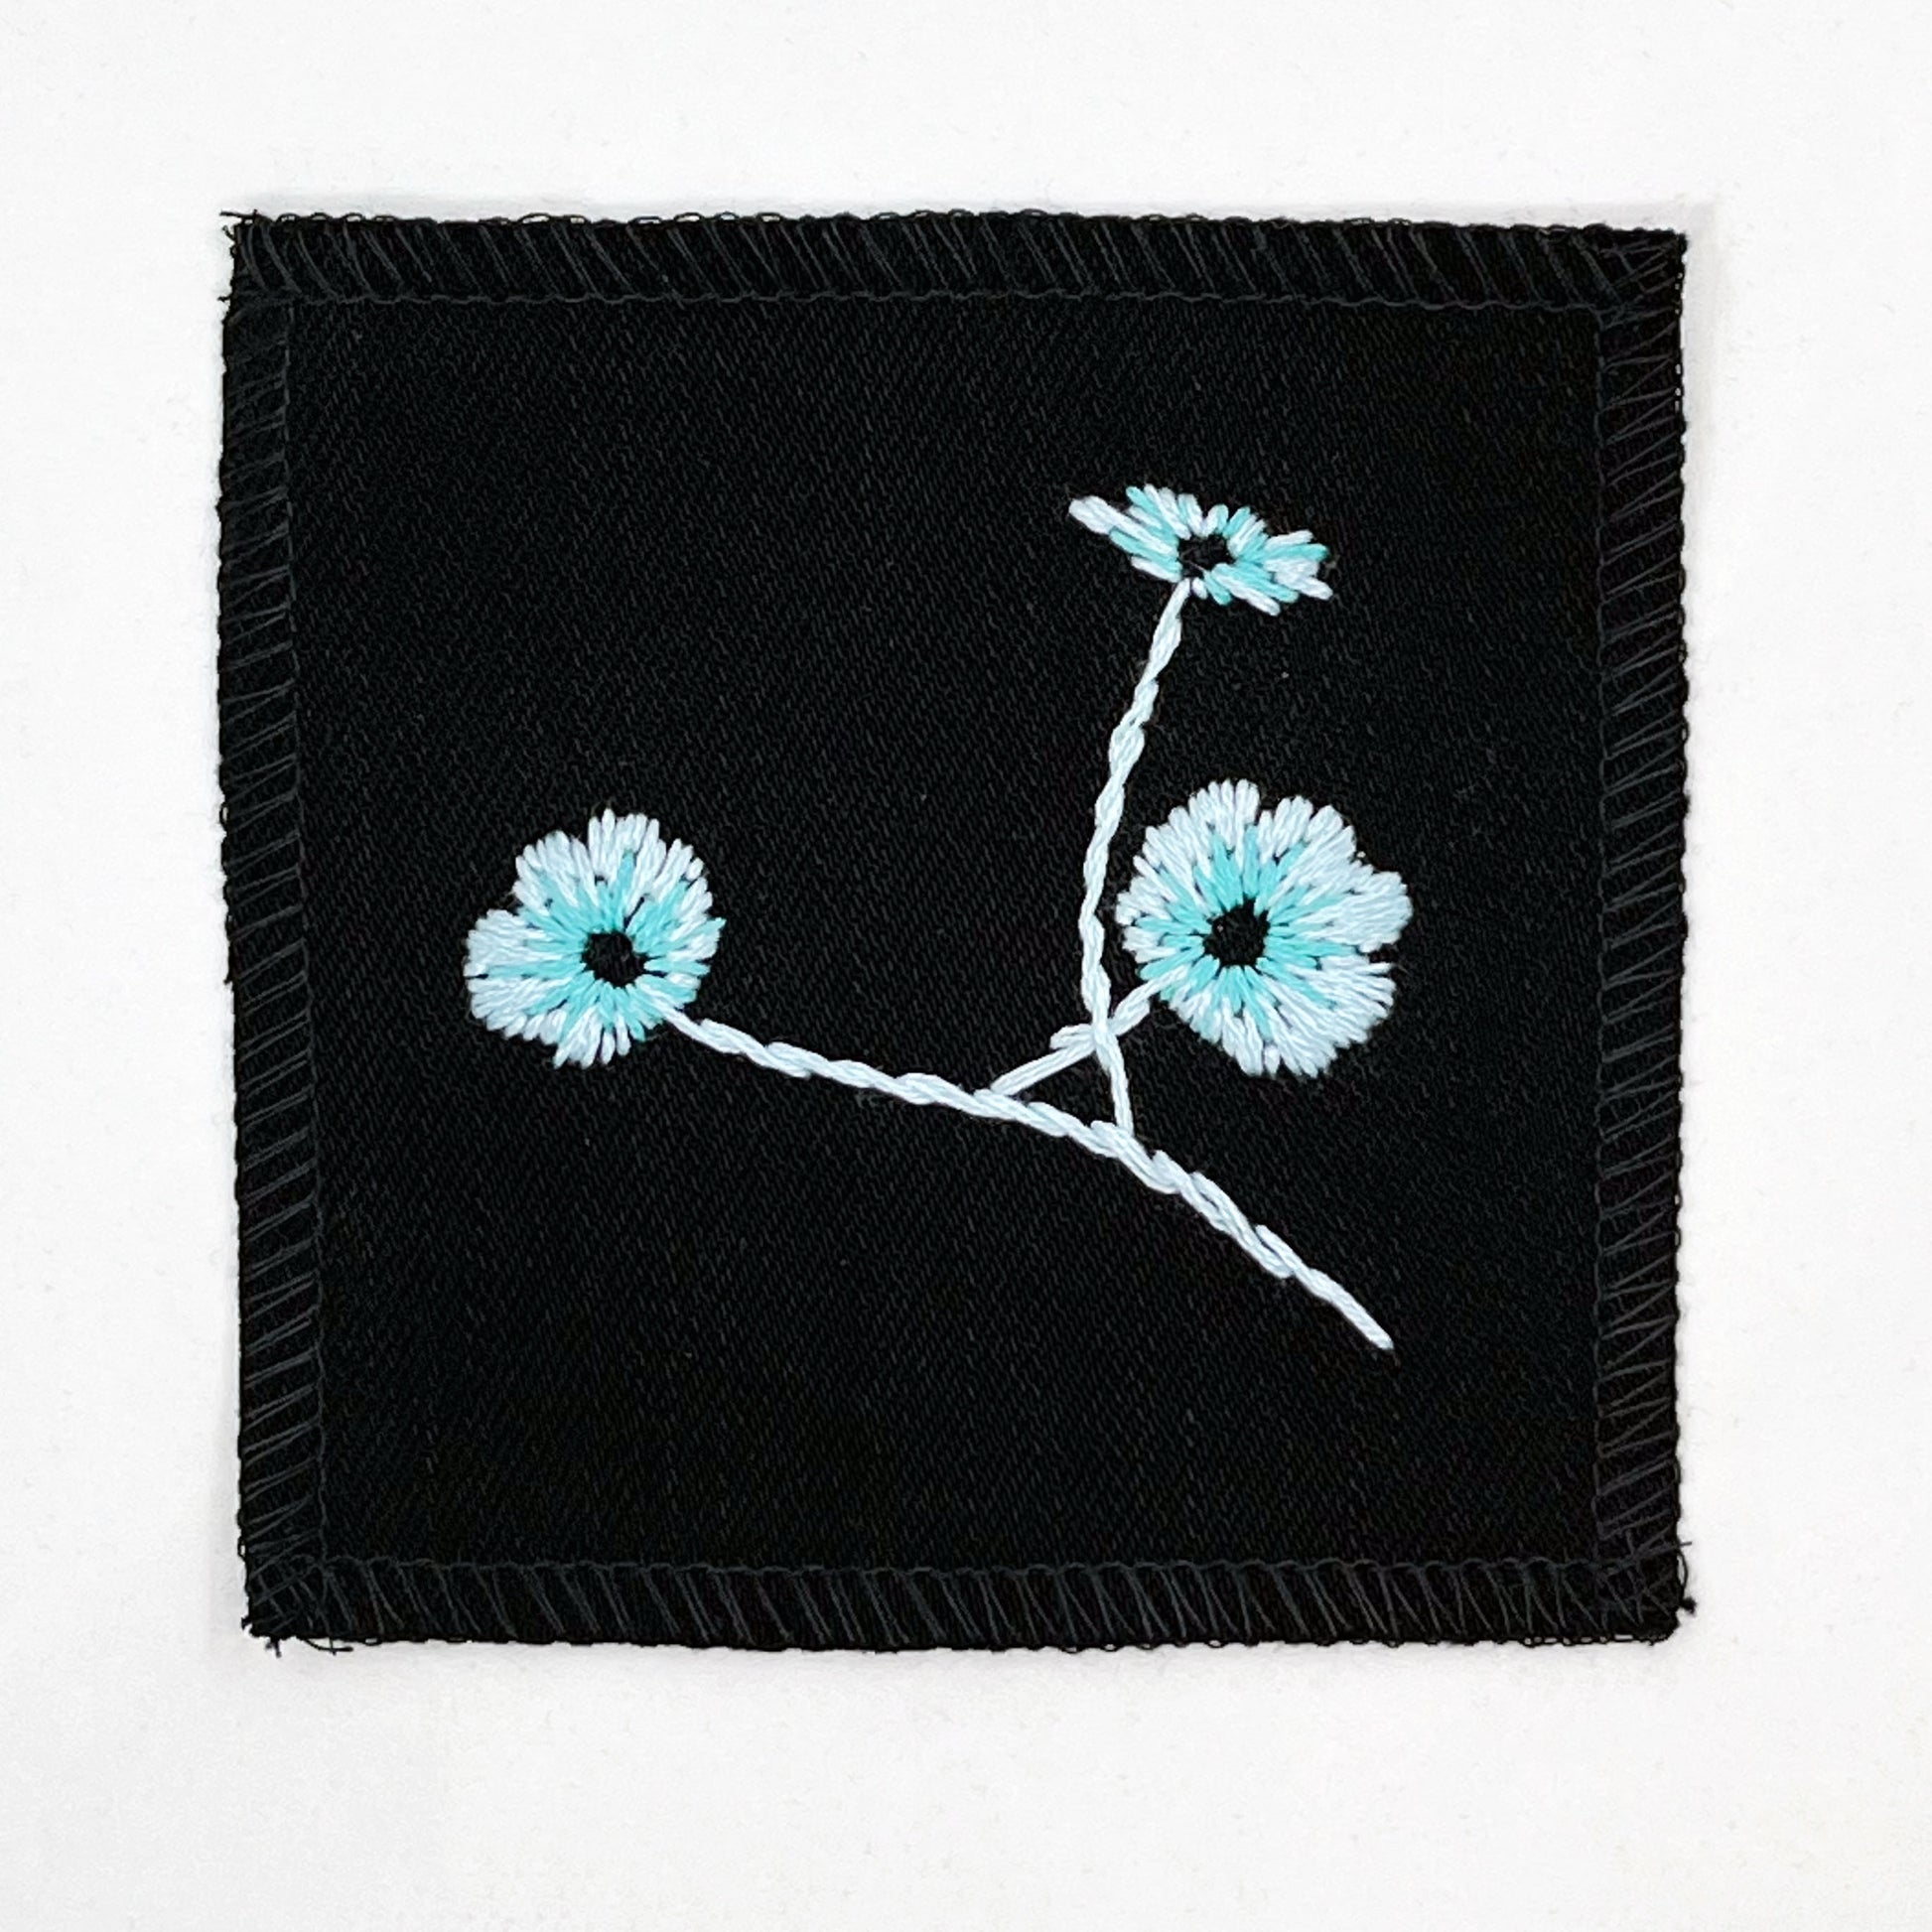 a black colored square patch, hand embroidered with three poppies on a stem, in shades of blue, with overlocked edges, on a white background